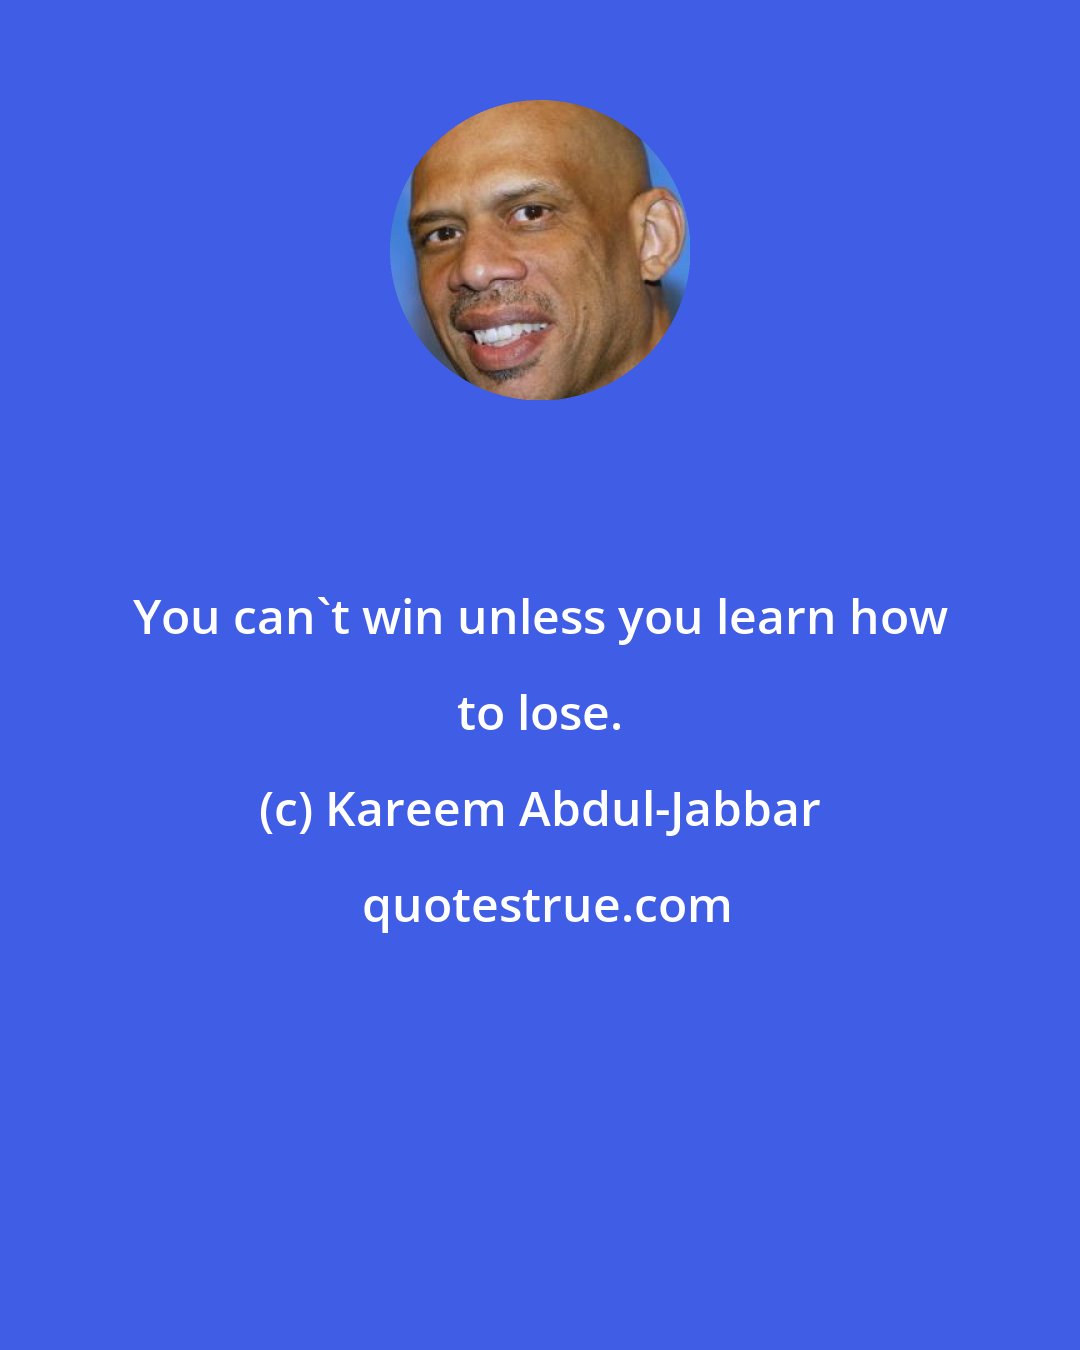 Kareem Abdul-Jabbar: You can't win unless you learn how to lose.